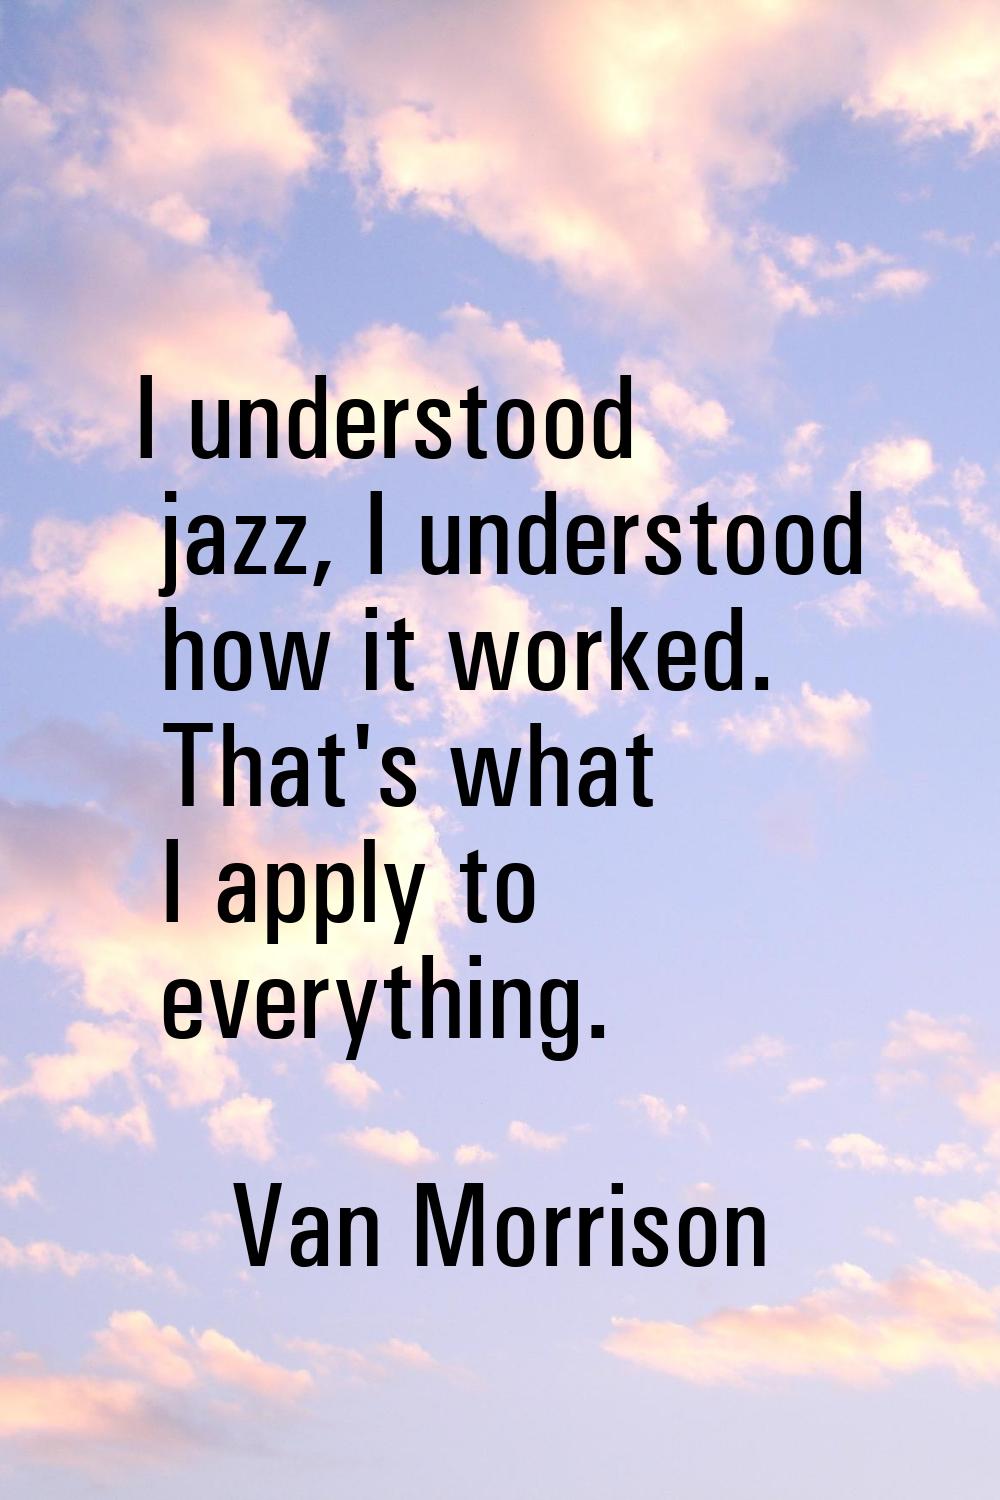 I understood jazz, I understood how it worked. That's what I apply to everything.